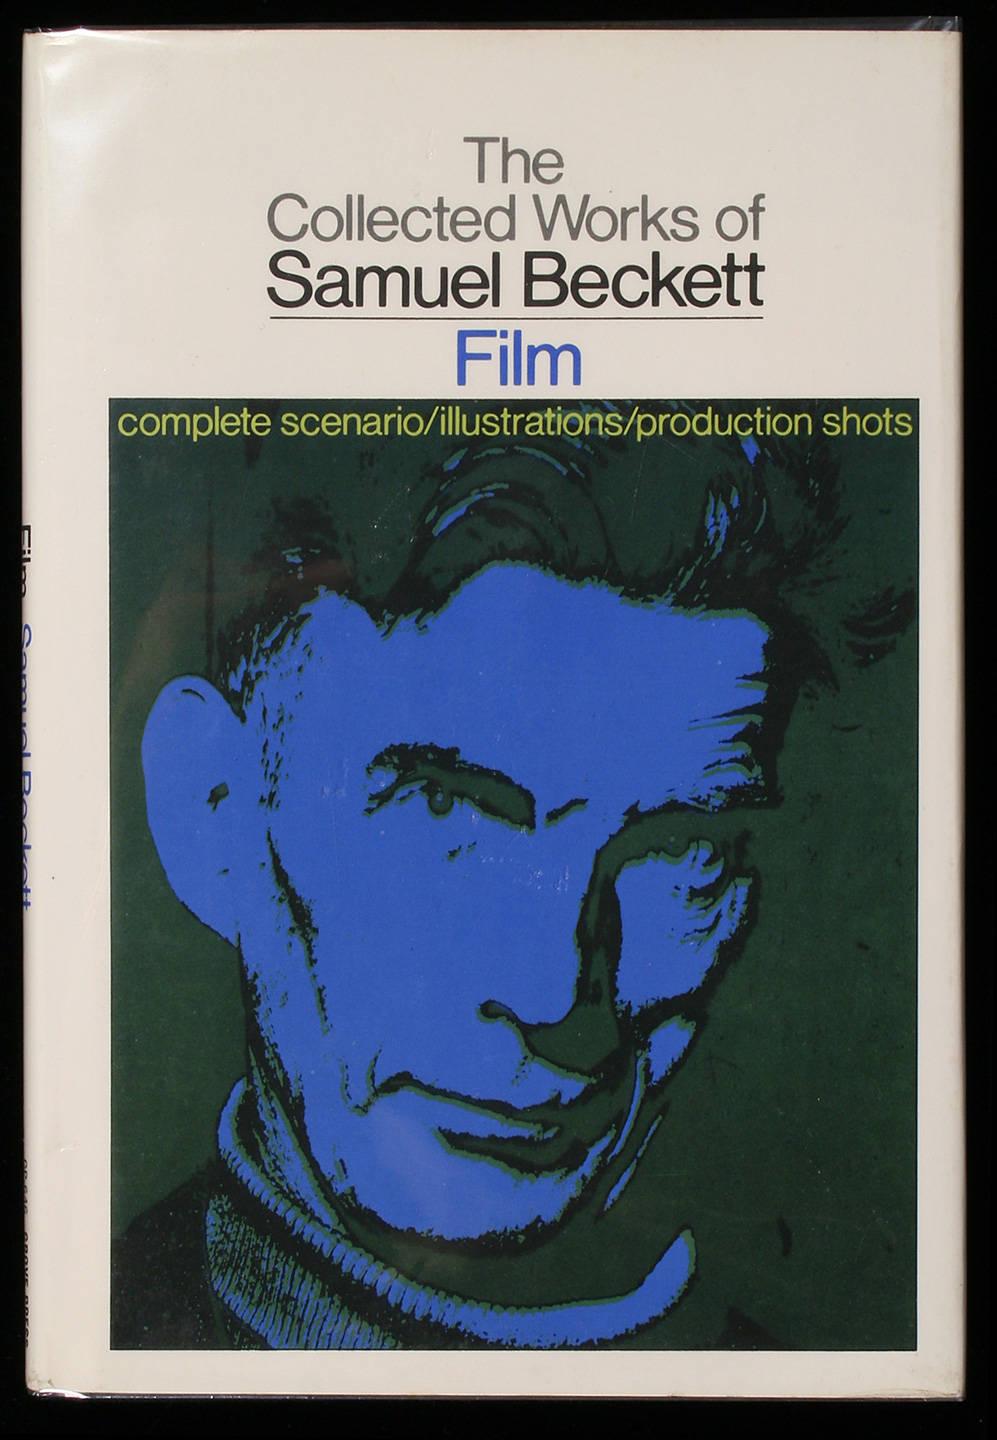 Samuel Beckett and the Politics of Aftermath by James McNaughton